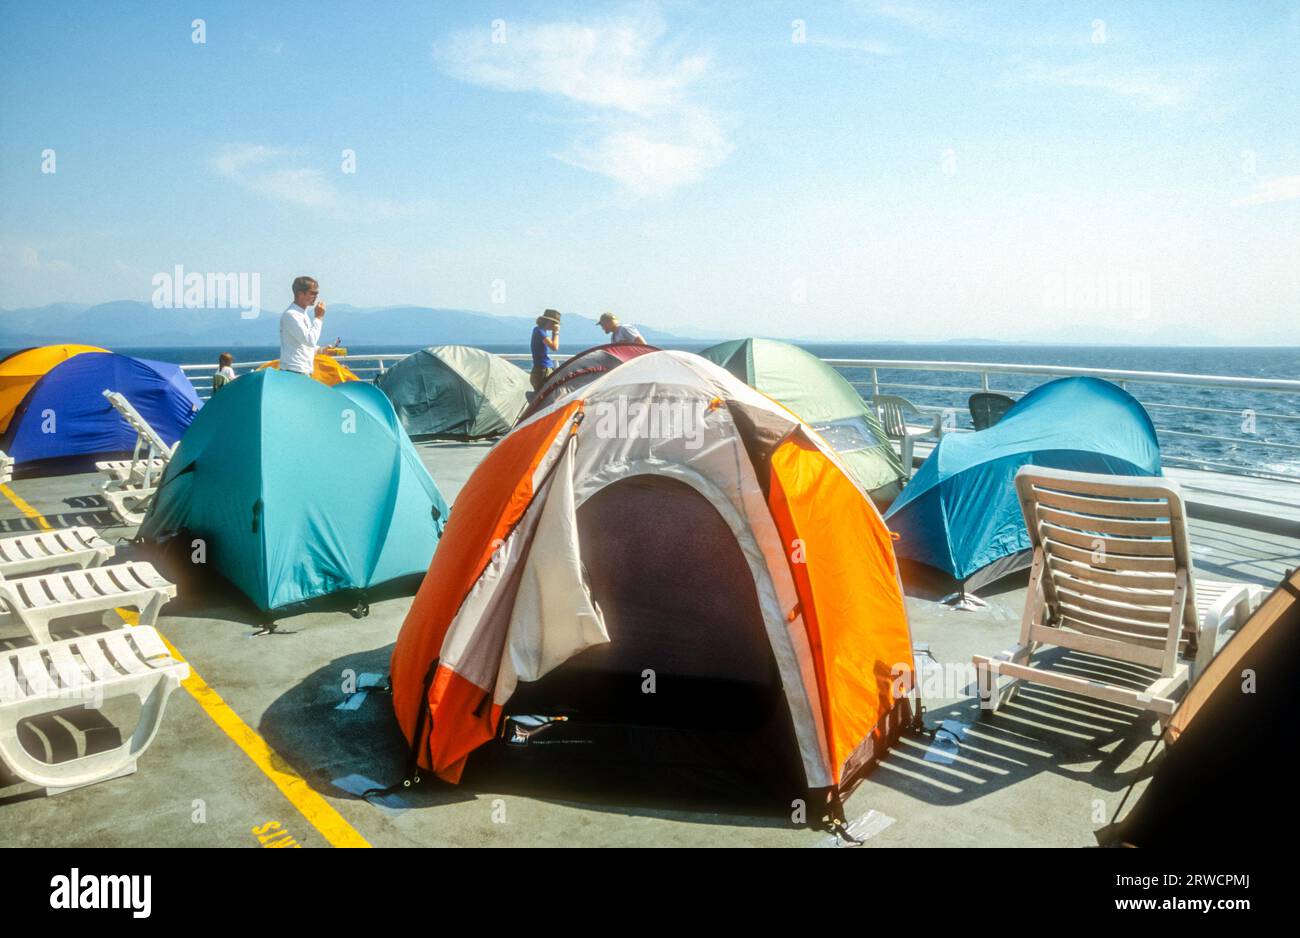 People travelling to Alaska by ferry saving on cost of a cabin by pitching tents on deck.  On MV Columbia. Stock Photo